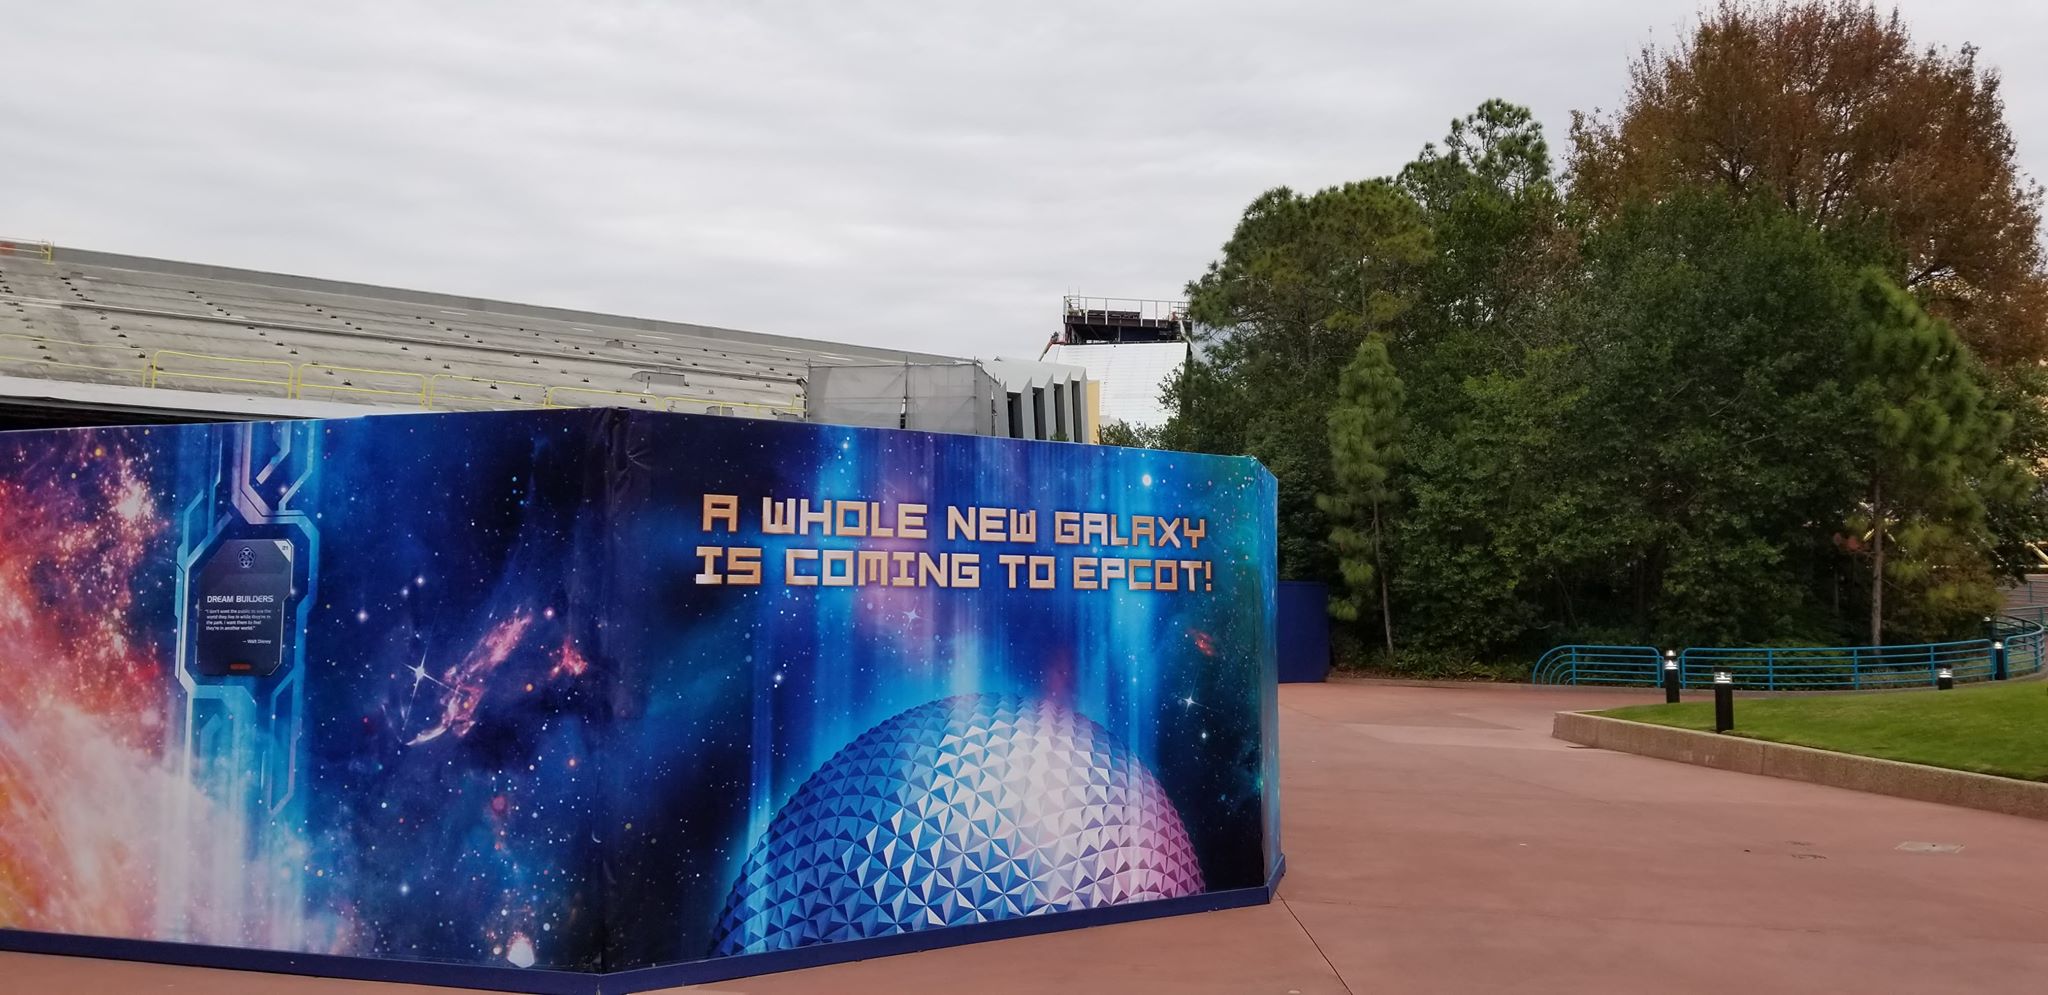 Construction Update: Guardians Of The Galaxy Coaster Building Gets Outer Walls